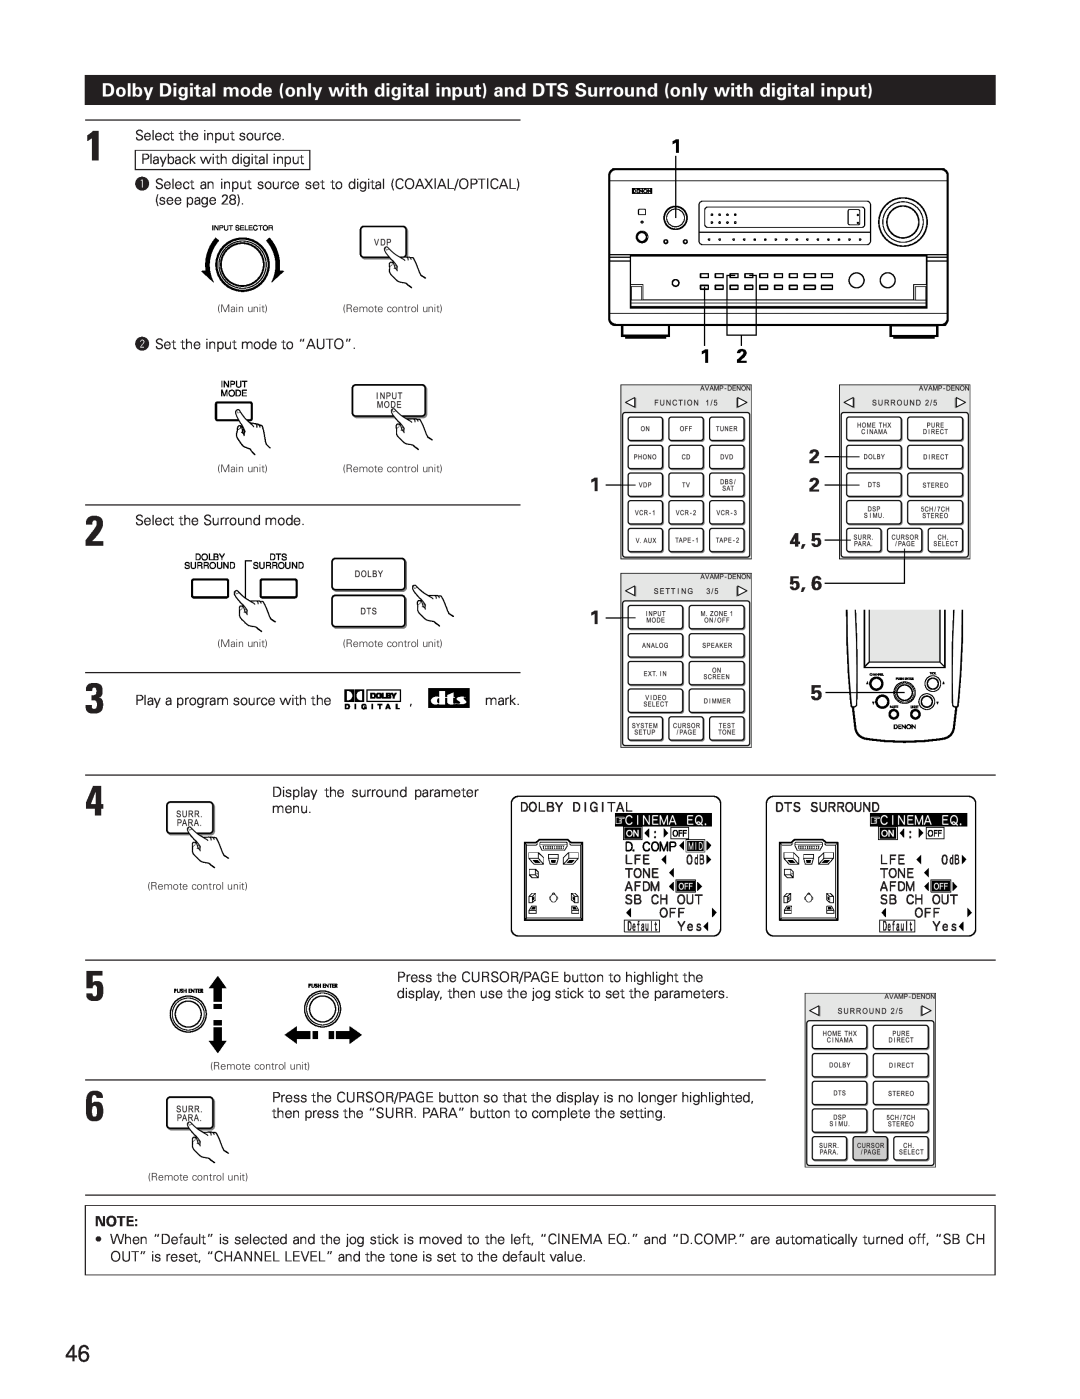 Denon AVR-5800 operating instructions w Set the input mode to “AUTO”, Select the Surround mode 